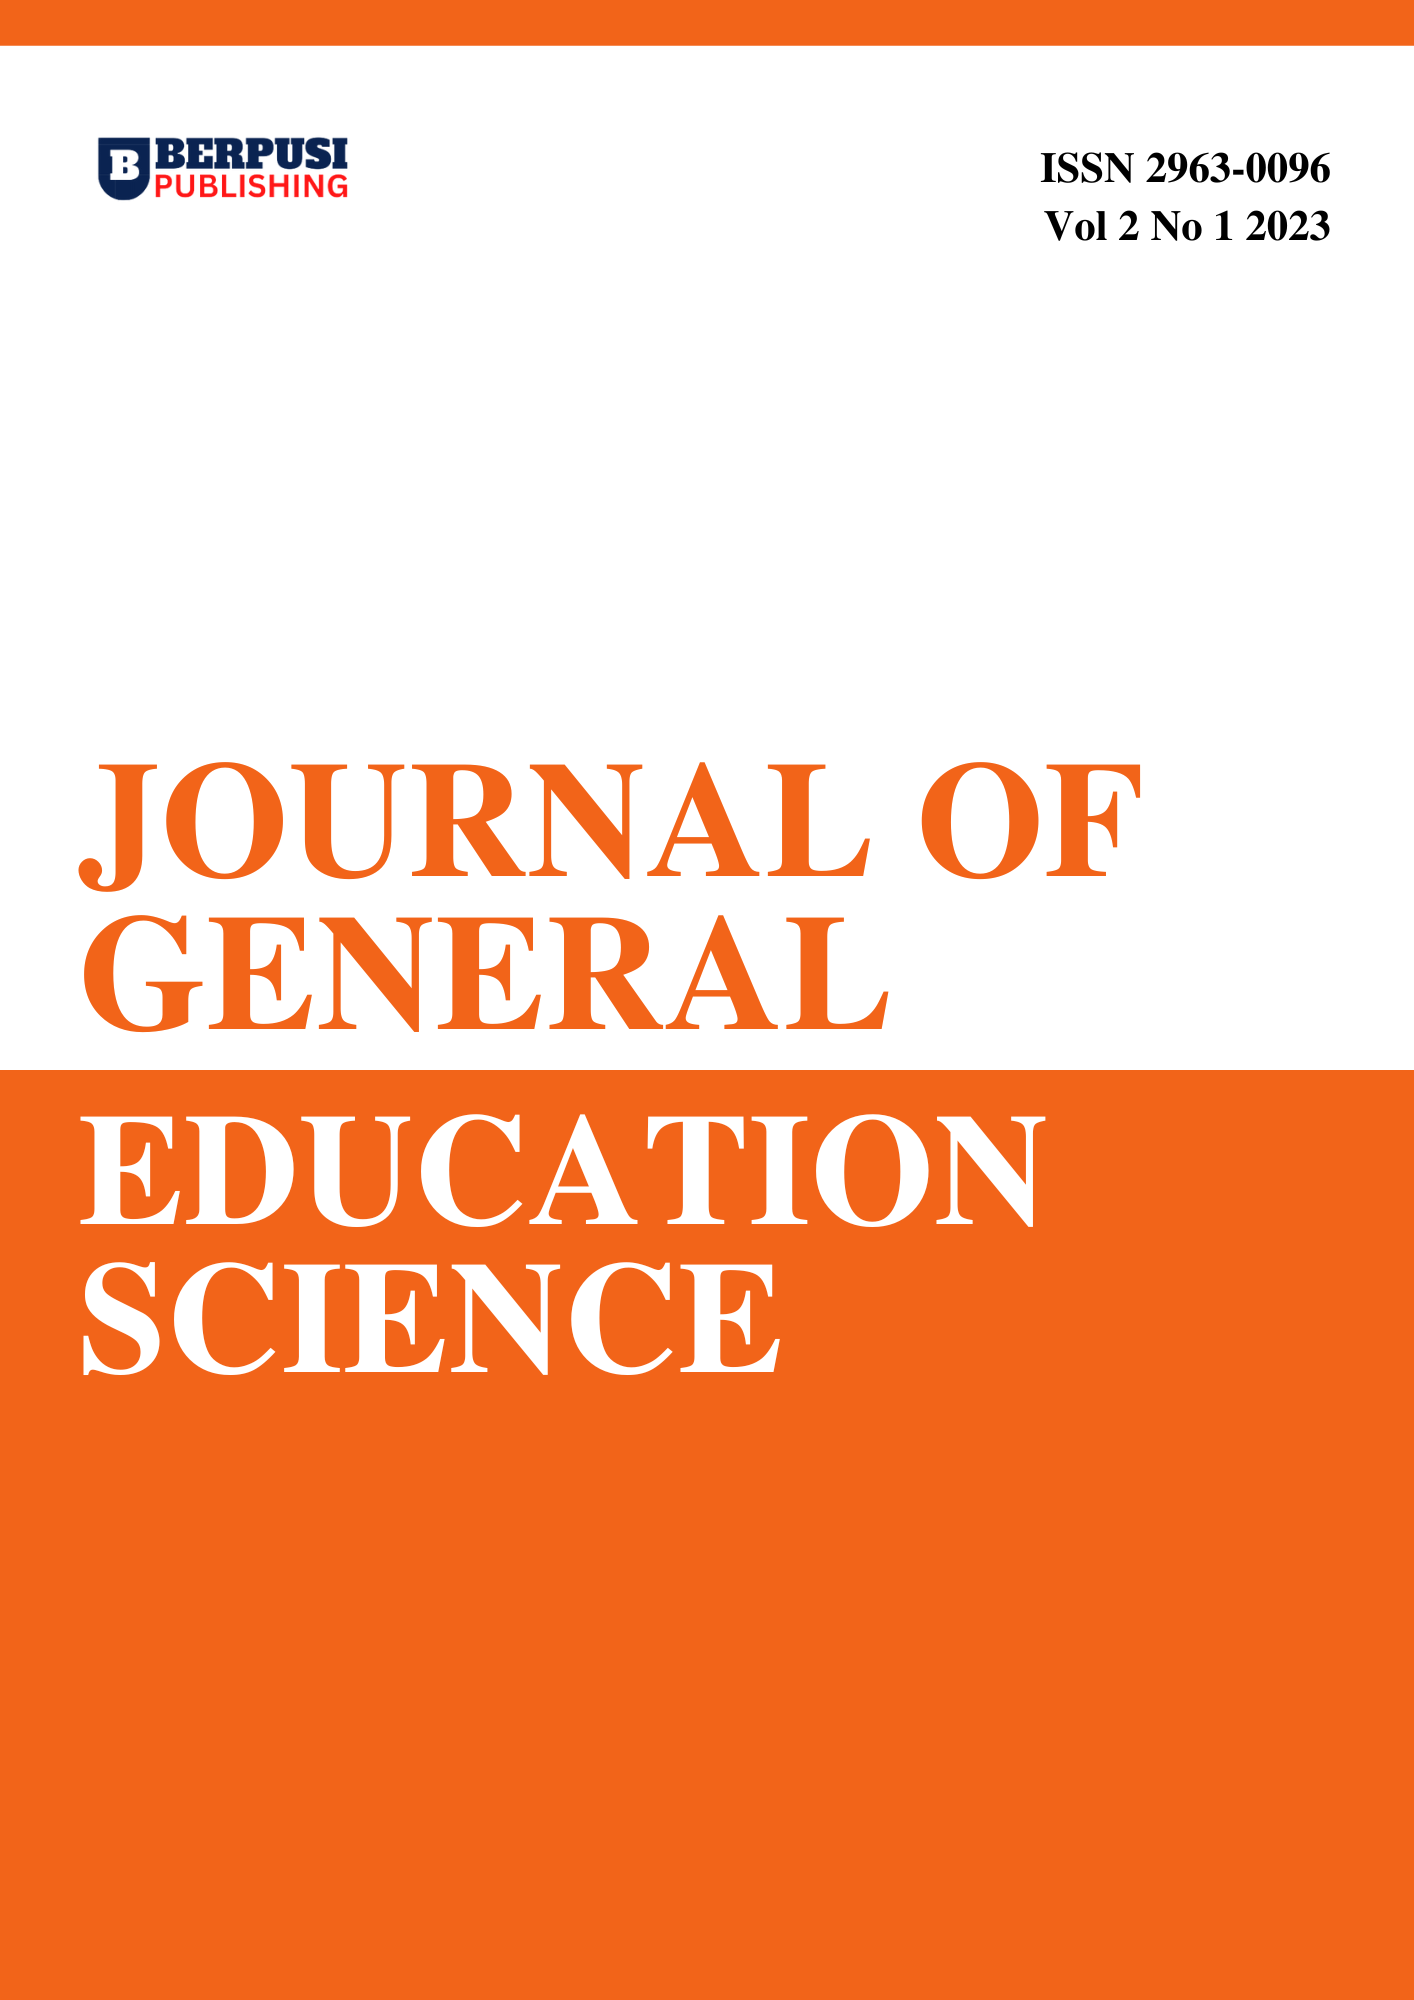 					View On Process Vol 2 No 1 (2023) Journal of General Education Science
				